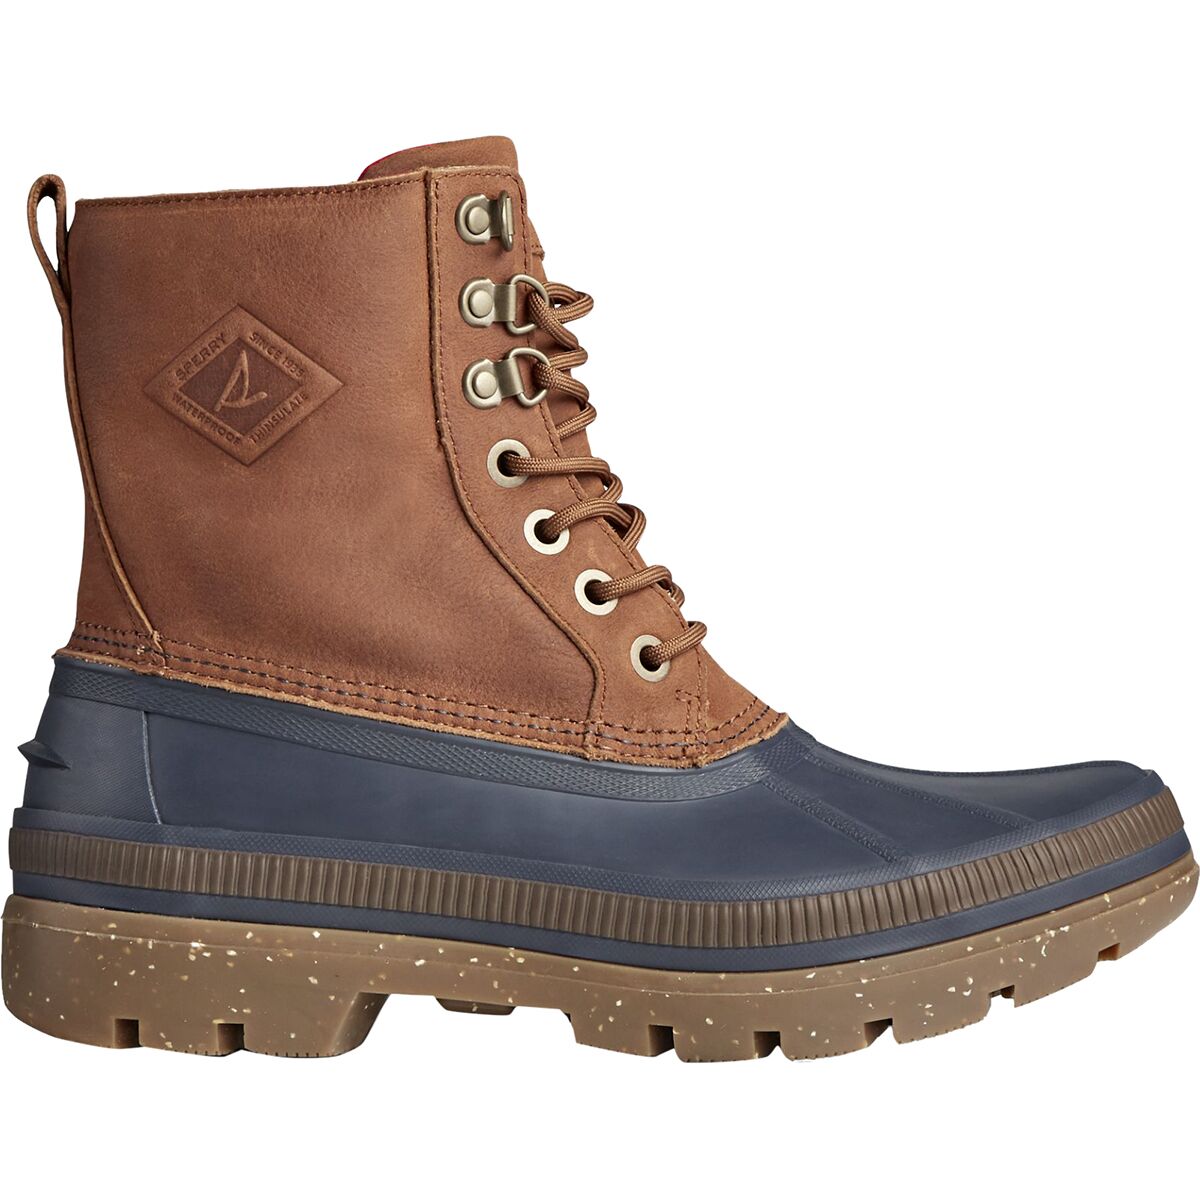 Sperry Top-Sider Ice Bay Boot - Men's